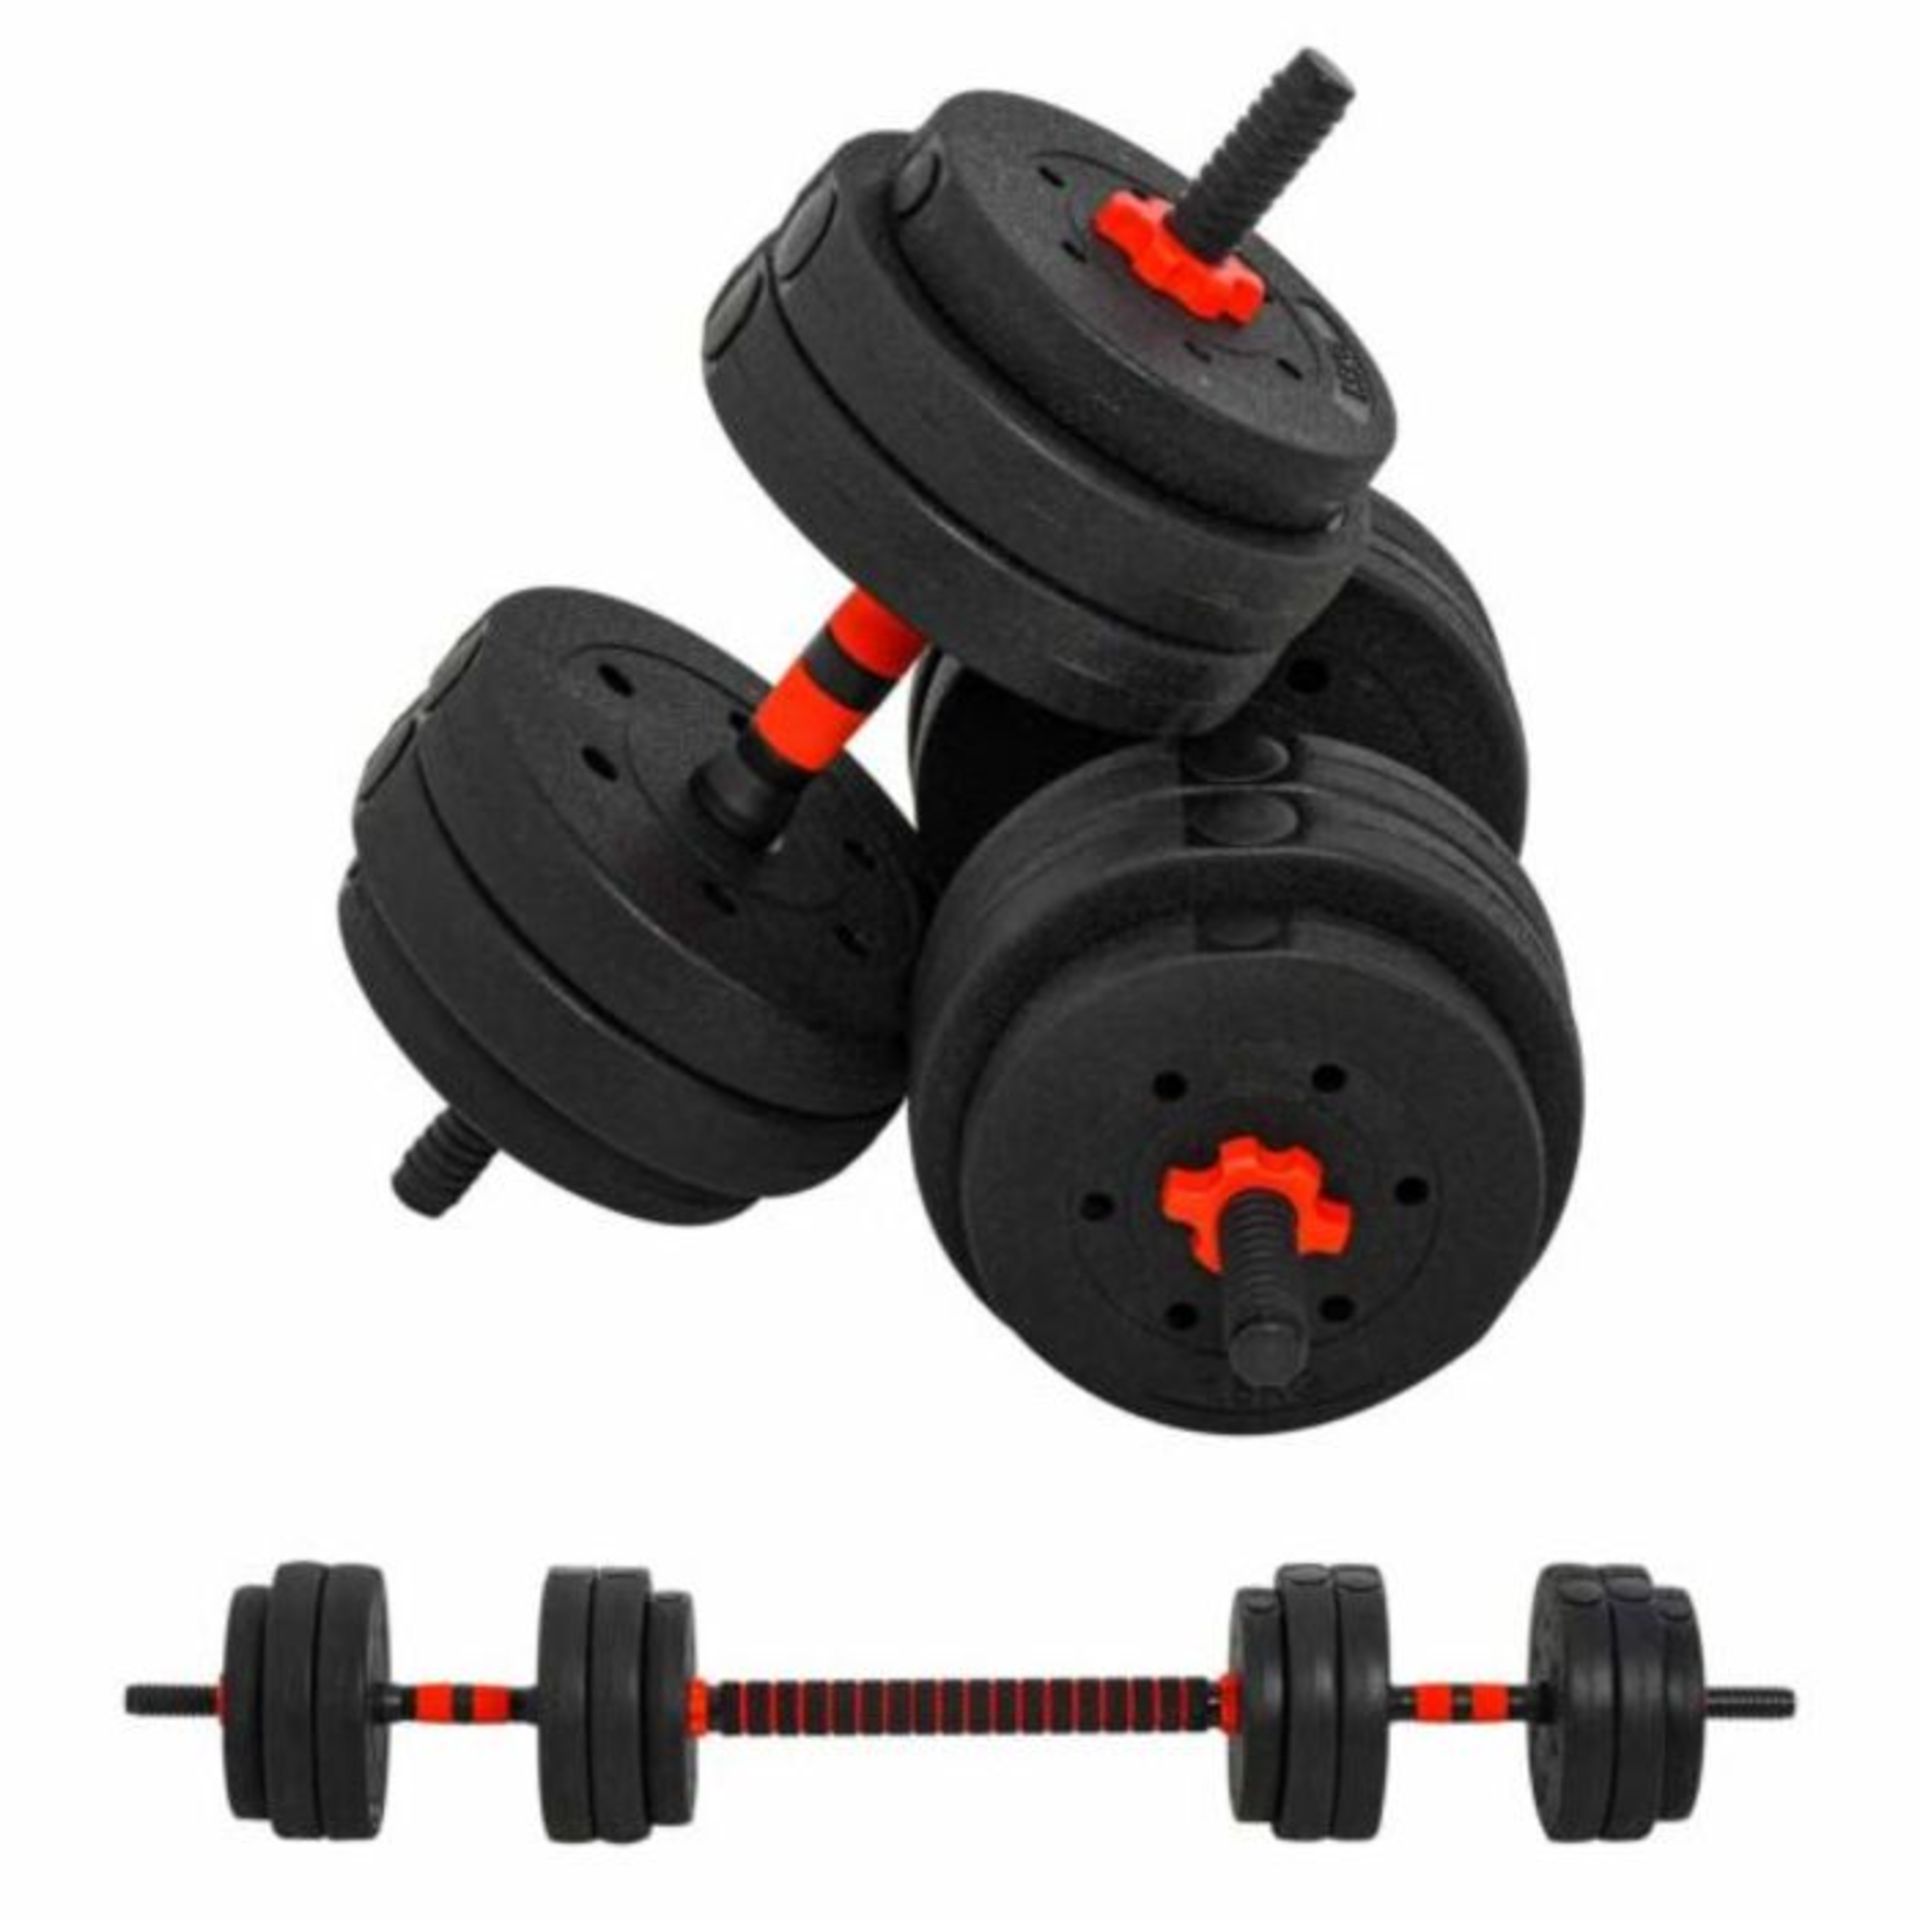 Hom Com 2 in1 Barbell/Dumb bell 30kg weight set, new and boxed, Similar sets retail at around œ50 - Image 2 of 4